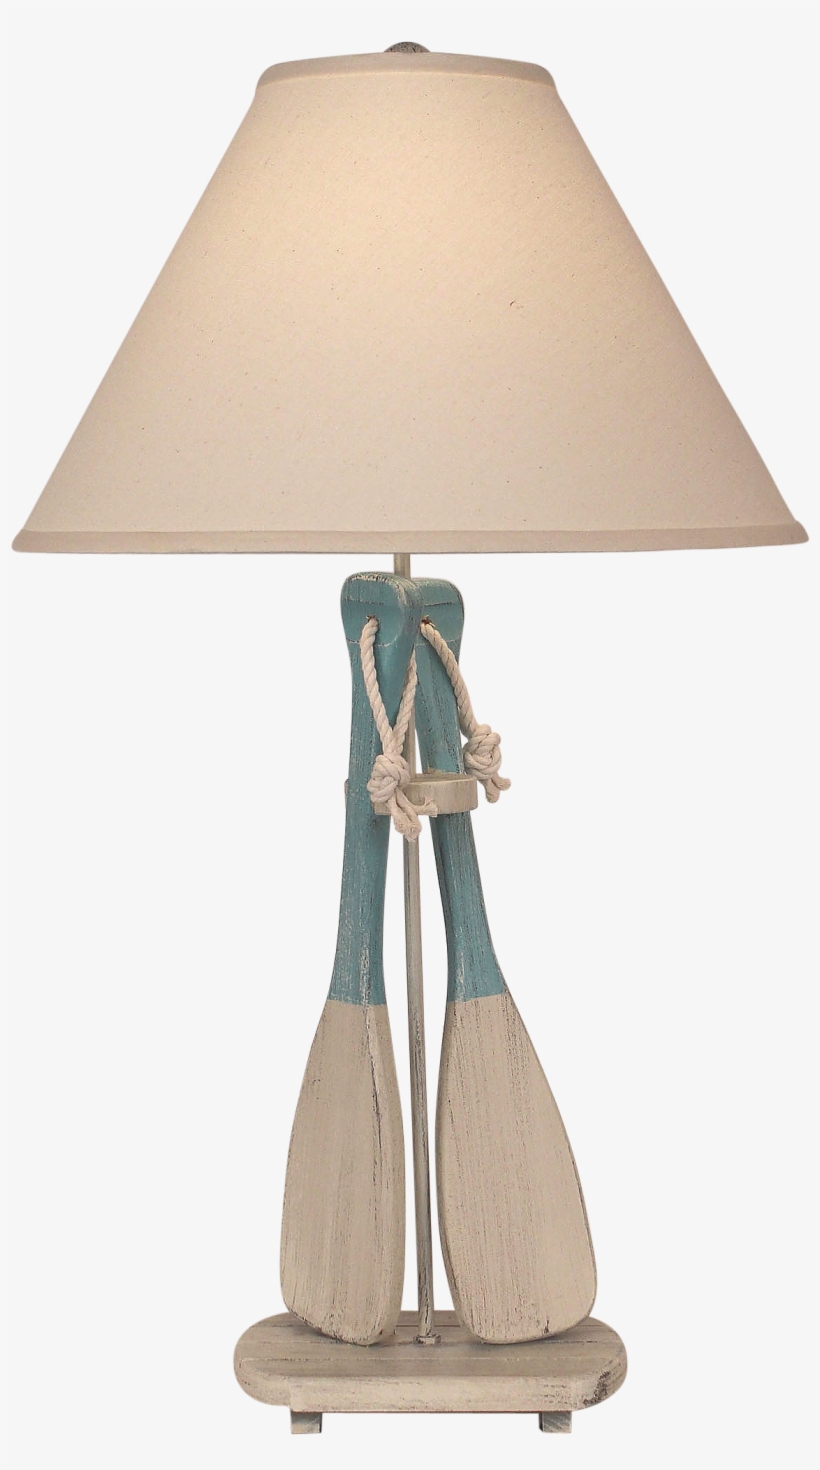 Cottage/turquoise Sea 2-paddles W/ White Rope Table - Electric Light, transparent png #4164423